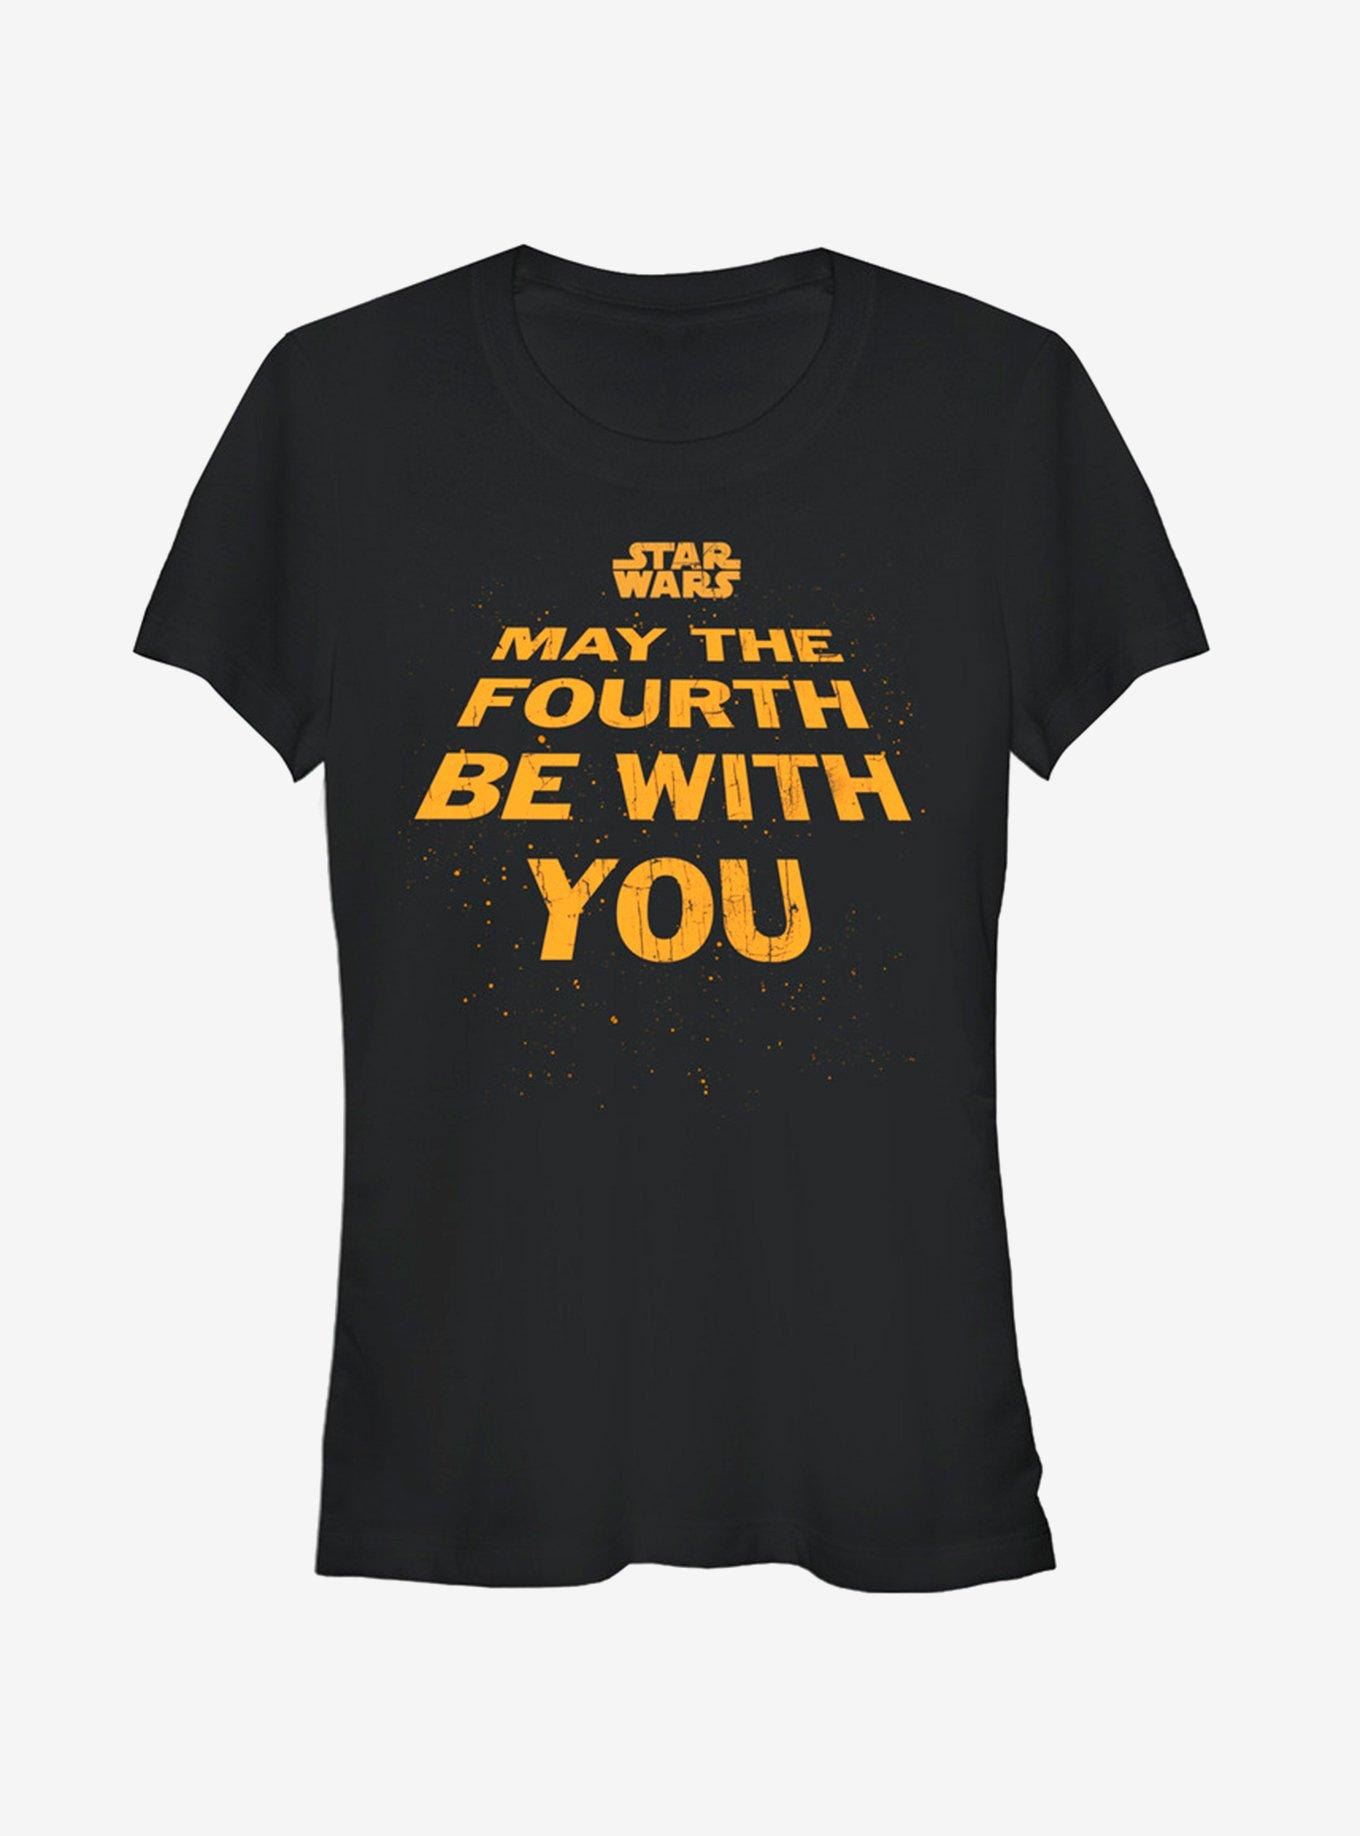 Star Wars May the Fourth Title Girls T-Shirt, BLACK, hi-res